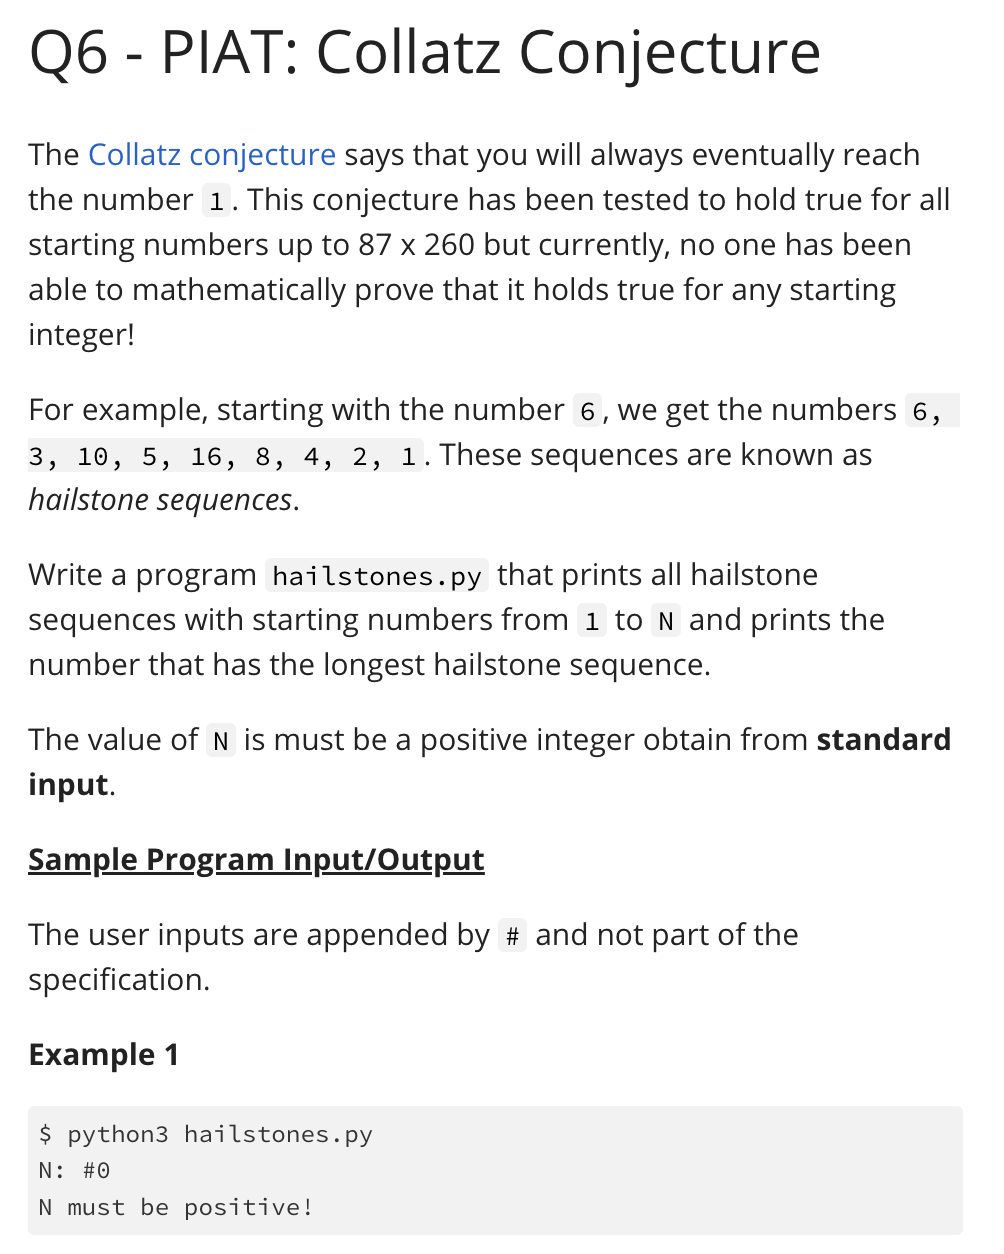 Q6 - PIAT: Collatz Conjecture
The Collatz conjecture says that you will always eventually reach
the number 1. This conjecture has been tested to hold true for all
starting numbers up to 87 x 260 but currently, no one has been
able to mathematically prove that it holds true for any starting
integer!
For example, starting with the number 6, we get the numbers 6,
3, 10, 5, 16, 8, 4, 2, 1.These sequences are known as
hailstone sequences.
Write a program hailstones.py that prints all hailstone
sequences with starting numbers from 1 to N and prints the
number that has the longest hailstone sequence.
The value of N is must be a positive integer obtain from standard
input.
Sample Program Input/Output
The user inputs are appended by # and not part of the
specification.
Example 1
$ python3 hailstones.py
N: #0
N must be positive!
